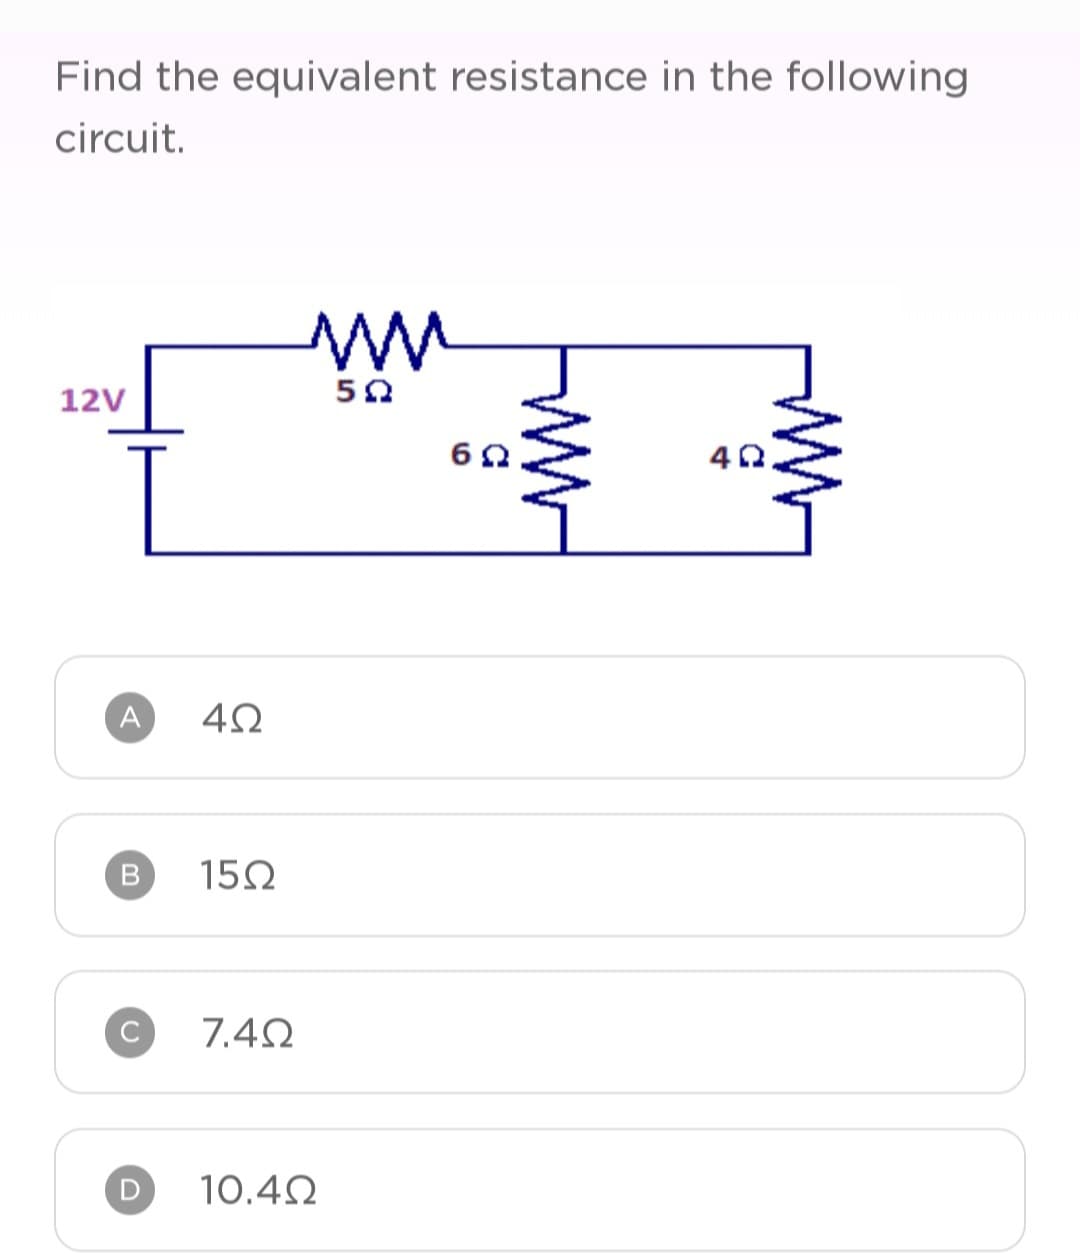 Find the equivalent resistance in the following
circuit.
12V
A
C
D
4Ω
15Ω
7.4Ω
ΜΜ
5Ω
10.4Ω
6Ω